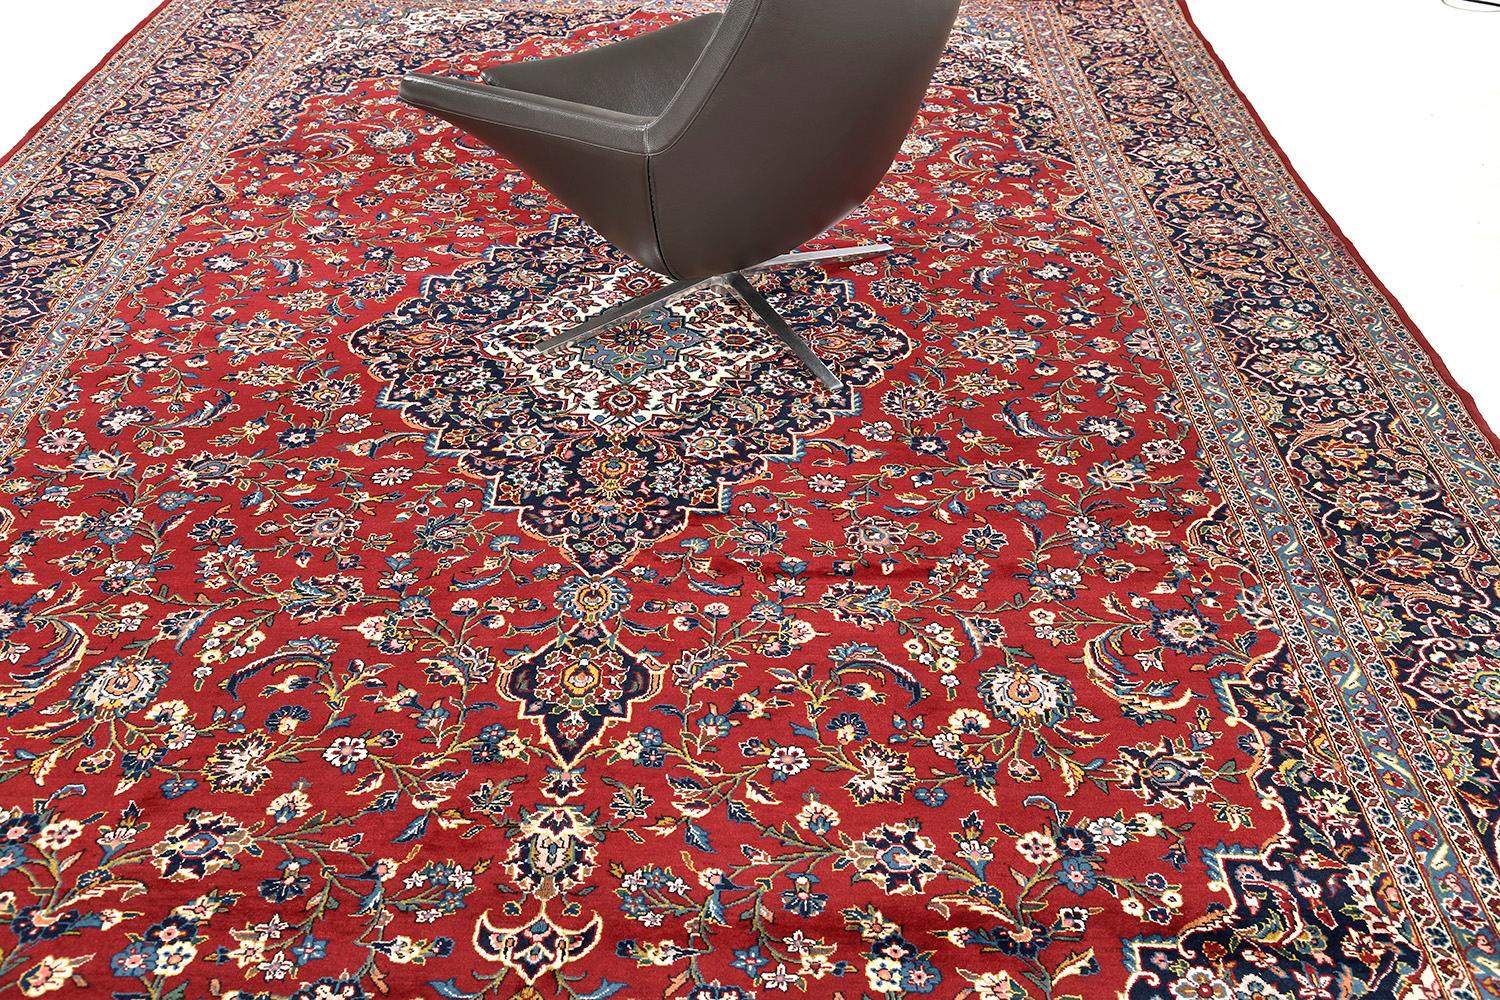 An outstanding masterpiece of Kashan rug that features a penny-worth impact from its every design. At its core, majestically presents a detailed floral theme and leafy scrolls. An effortless combination of various symmetrical symbolic motifs is in